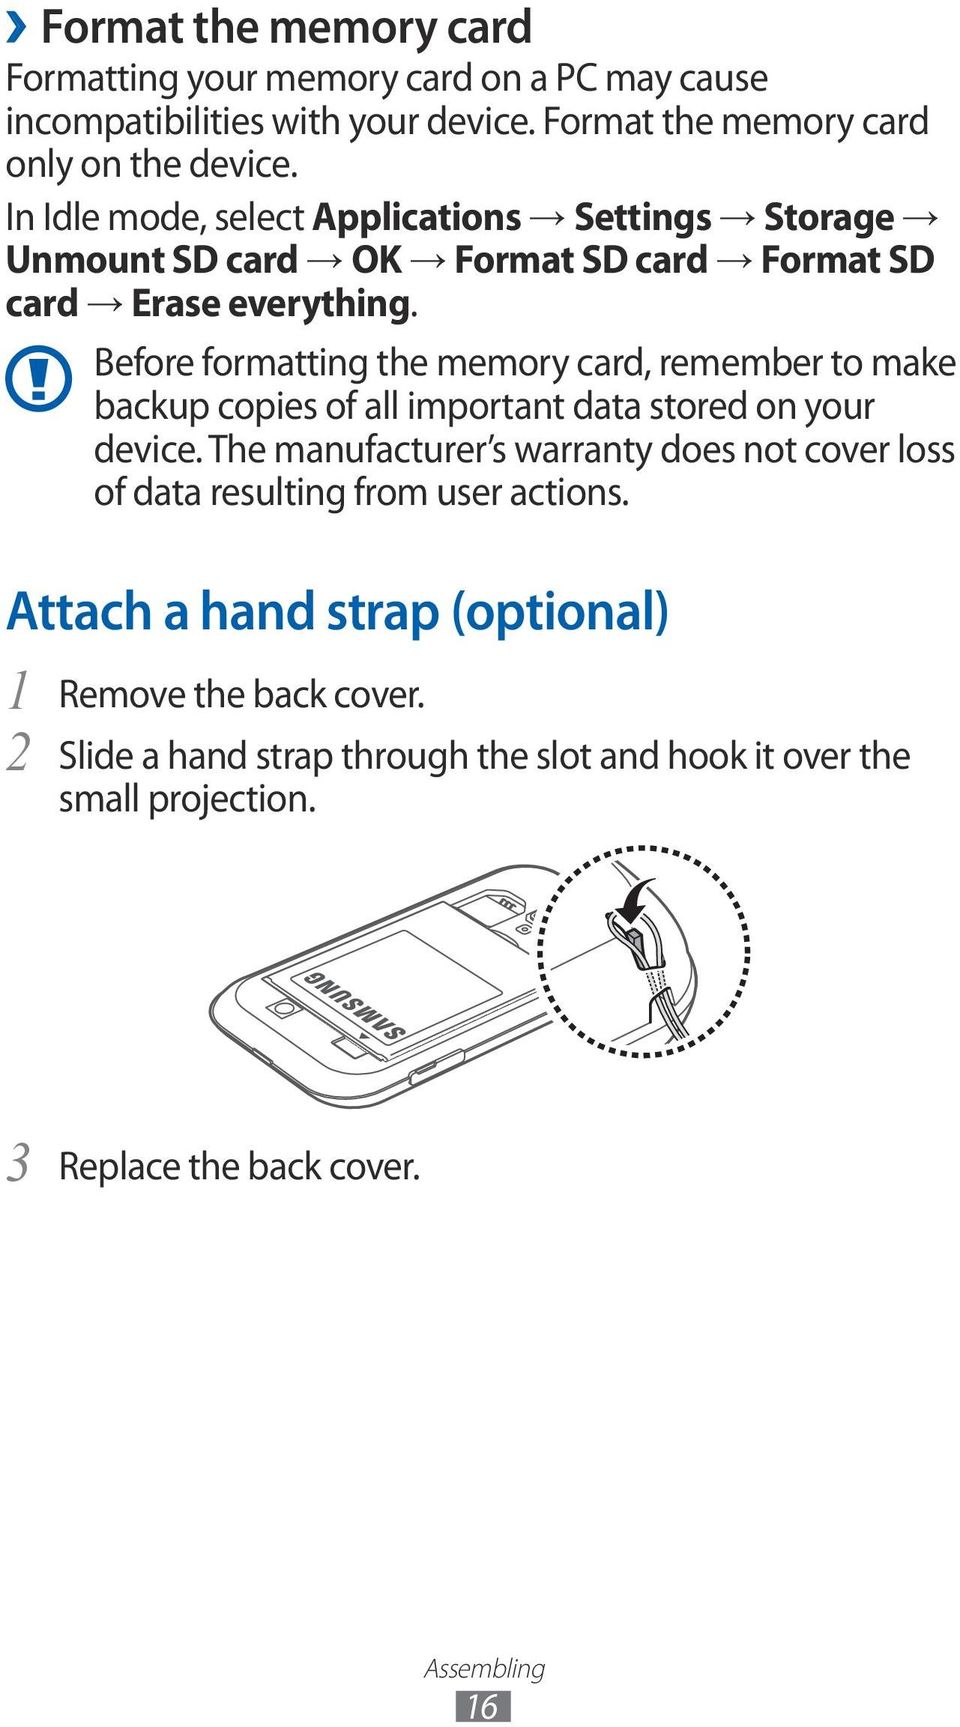 Before formatting the memory card, remember to make backup copies of all important data stored on your device.